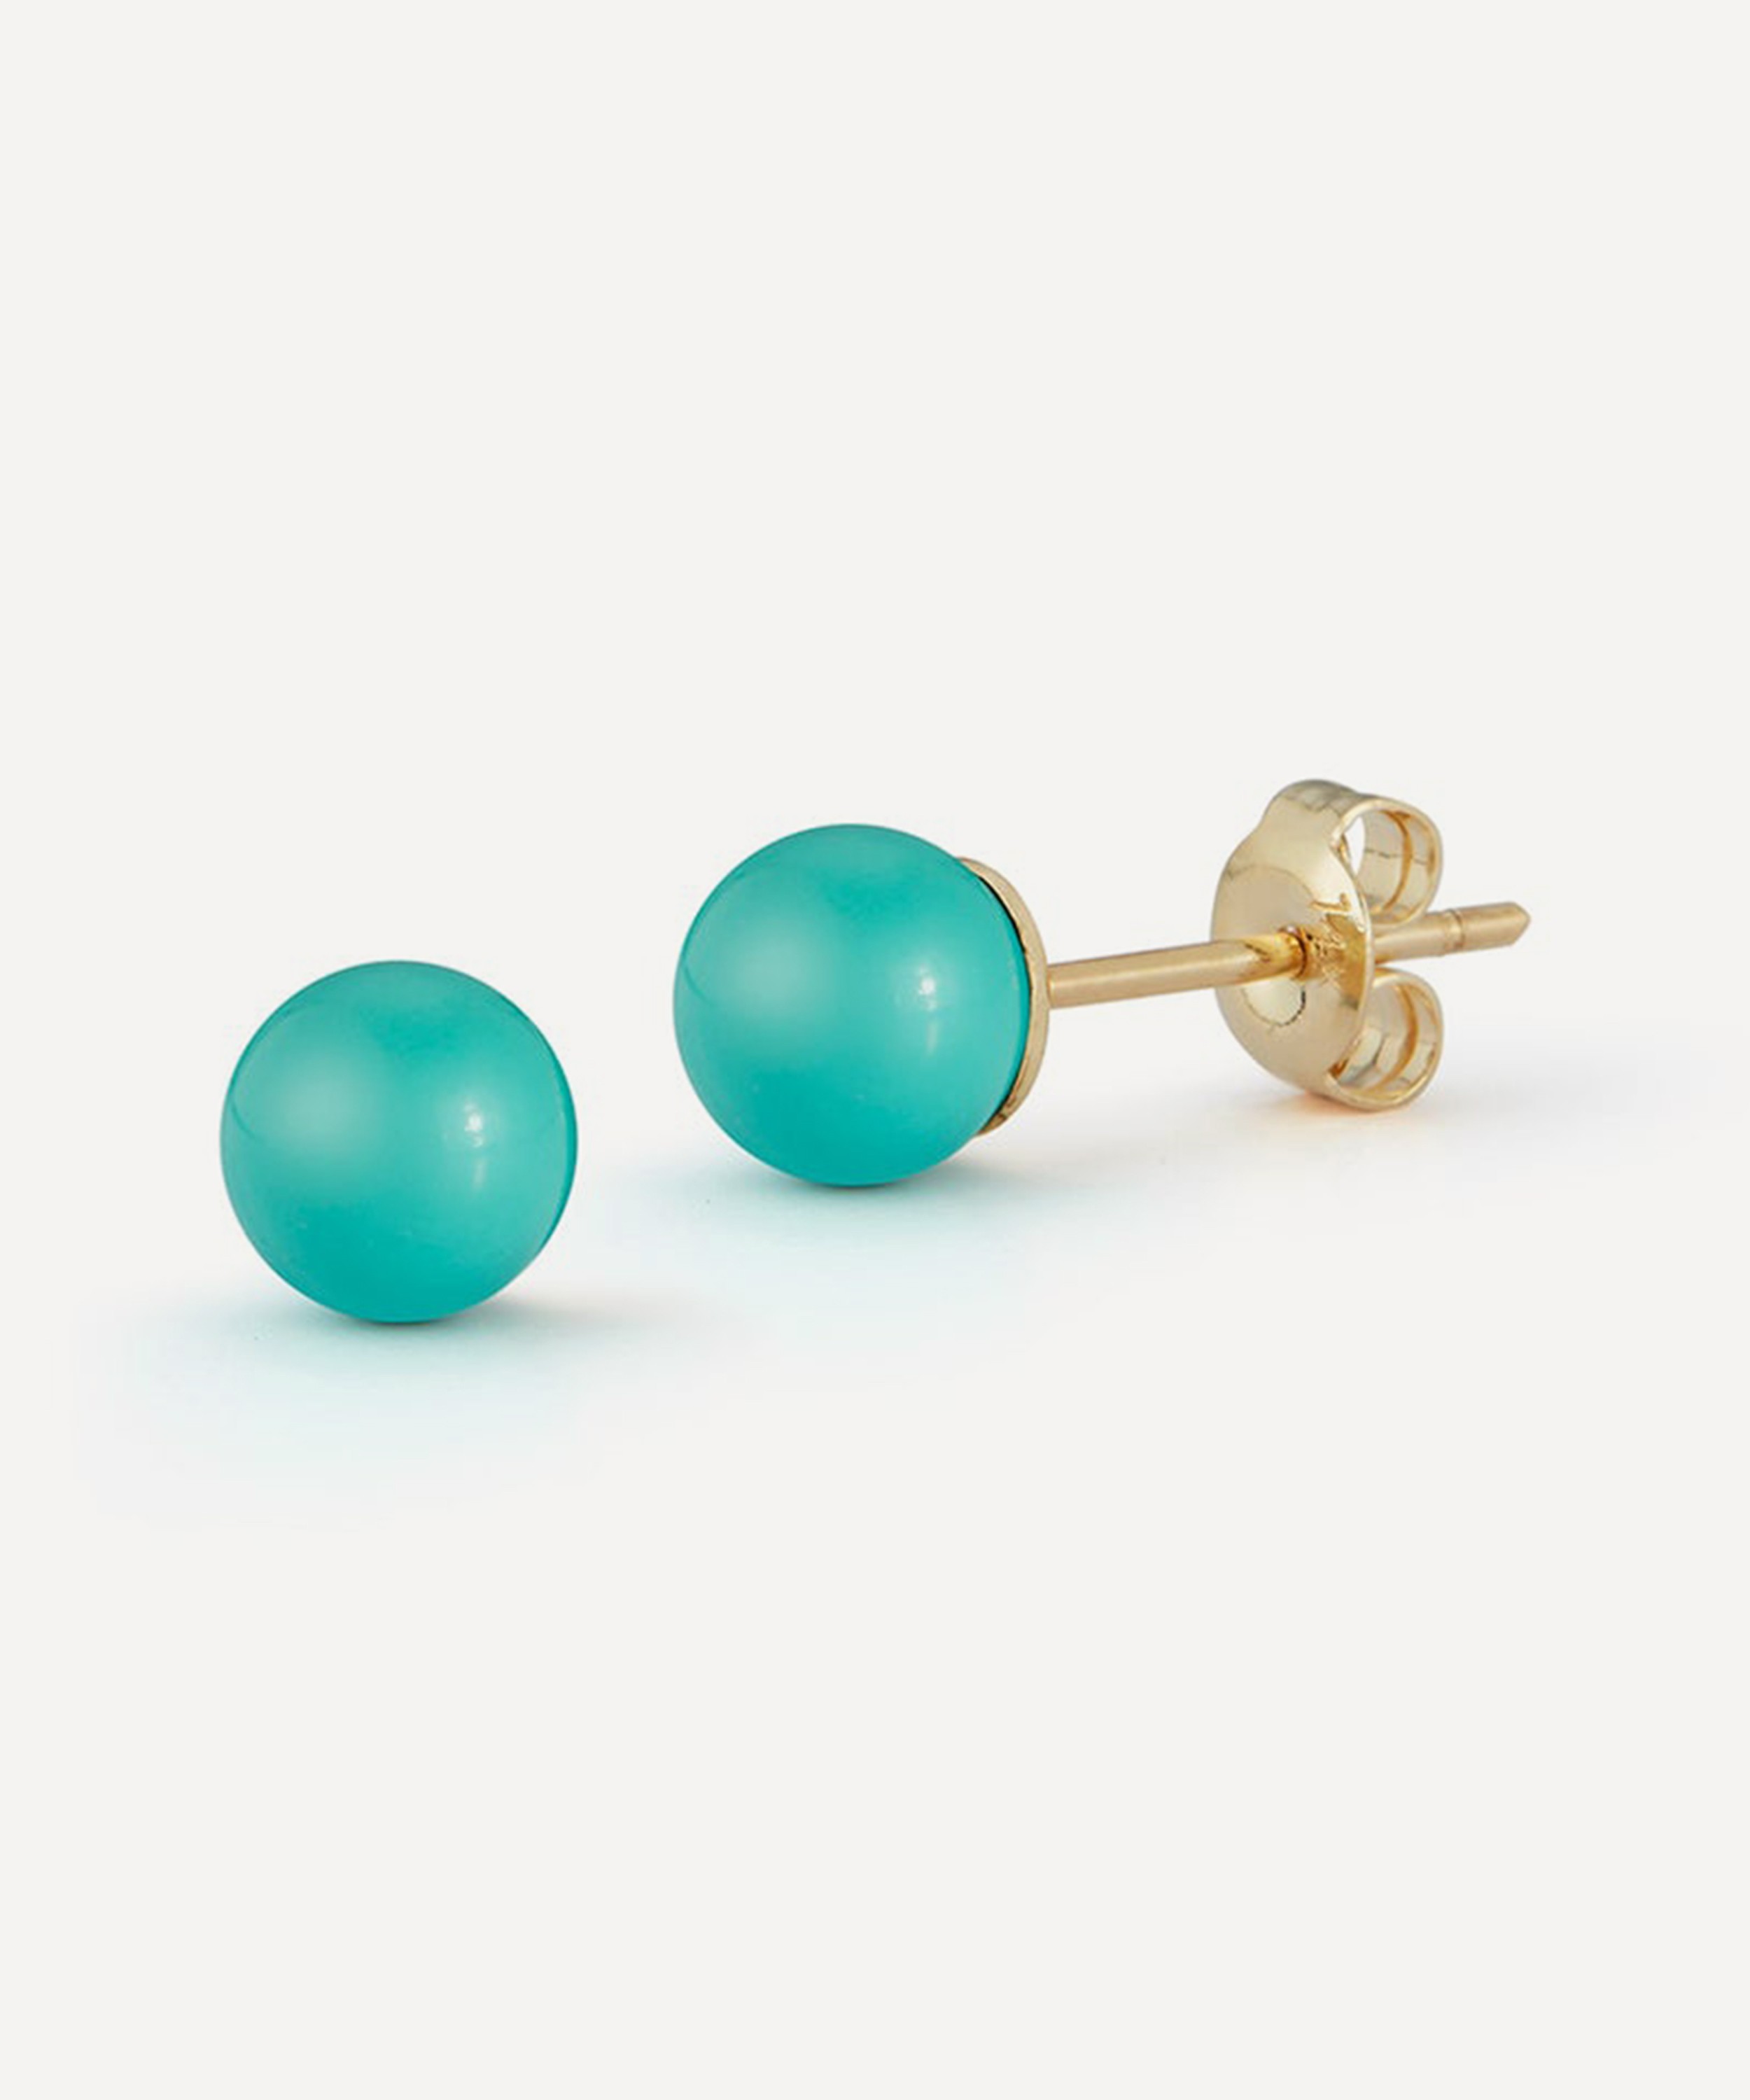 Mateo - 14ct Gold 6mm Turquoise Stud Earrings